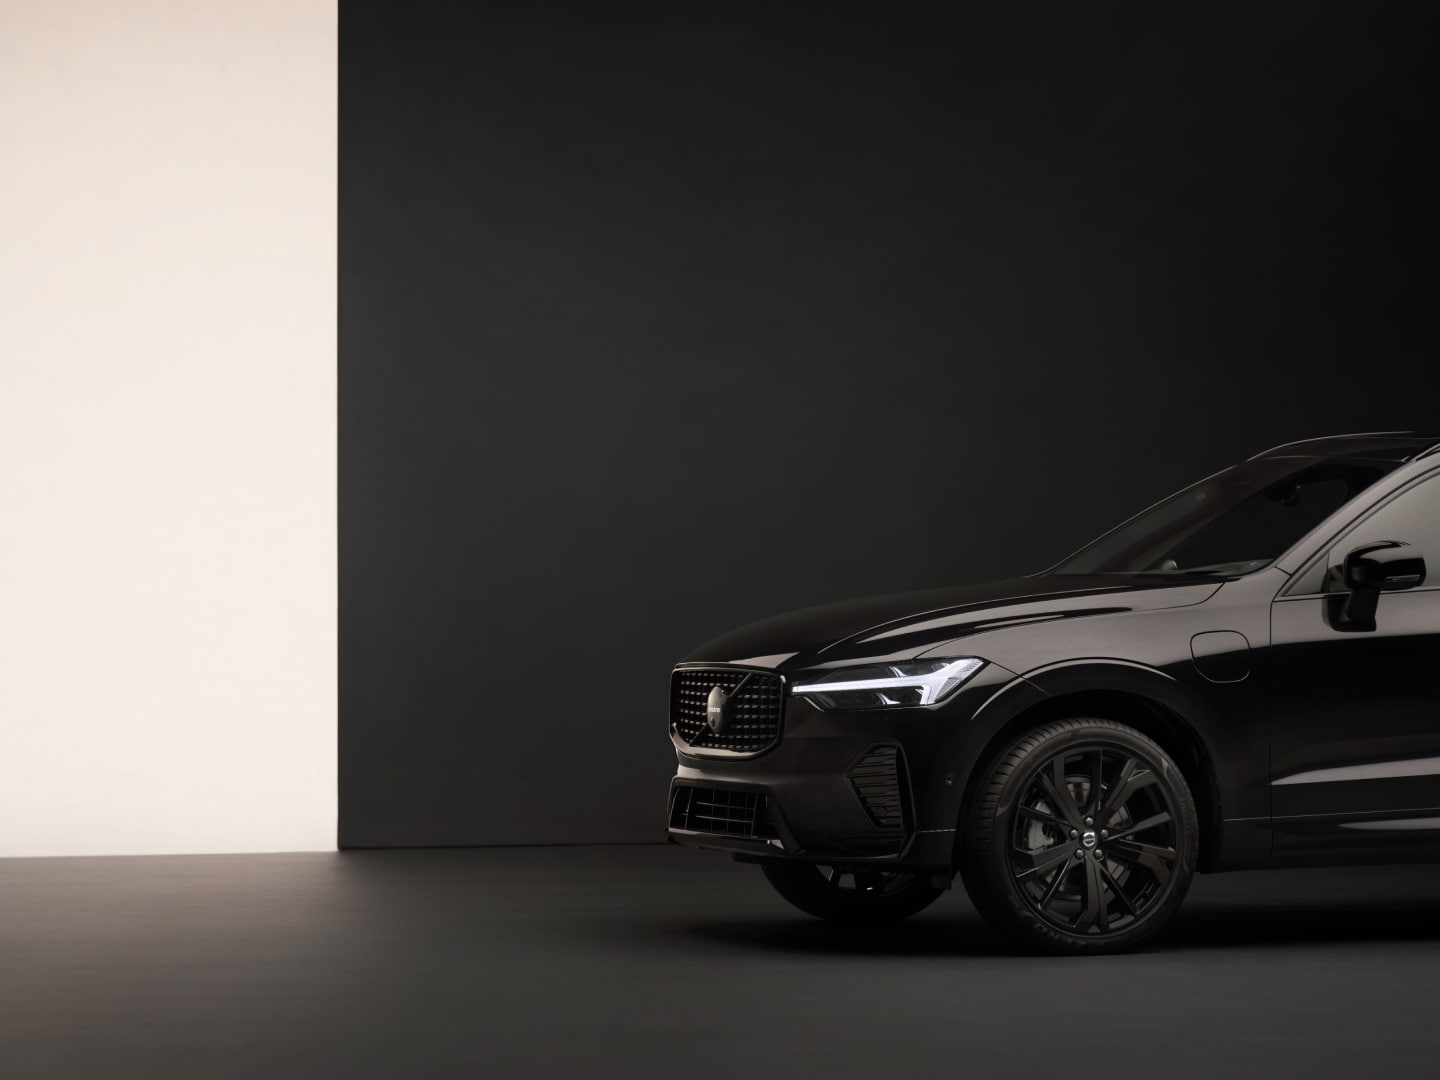 The front half of a Volvo XC60 Black Edition with unique black rims.